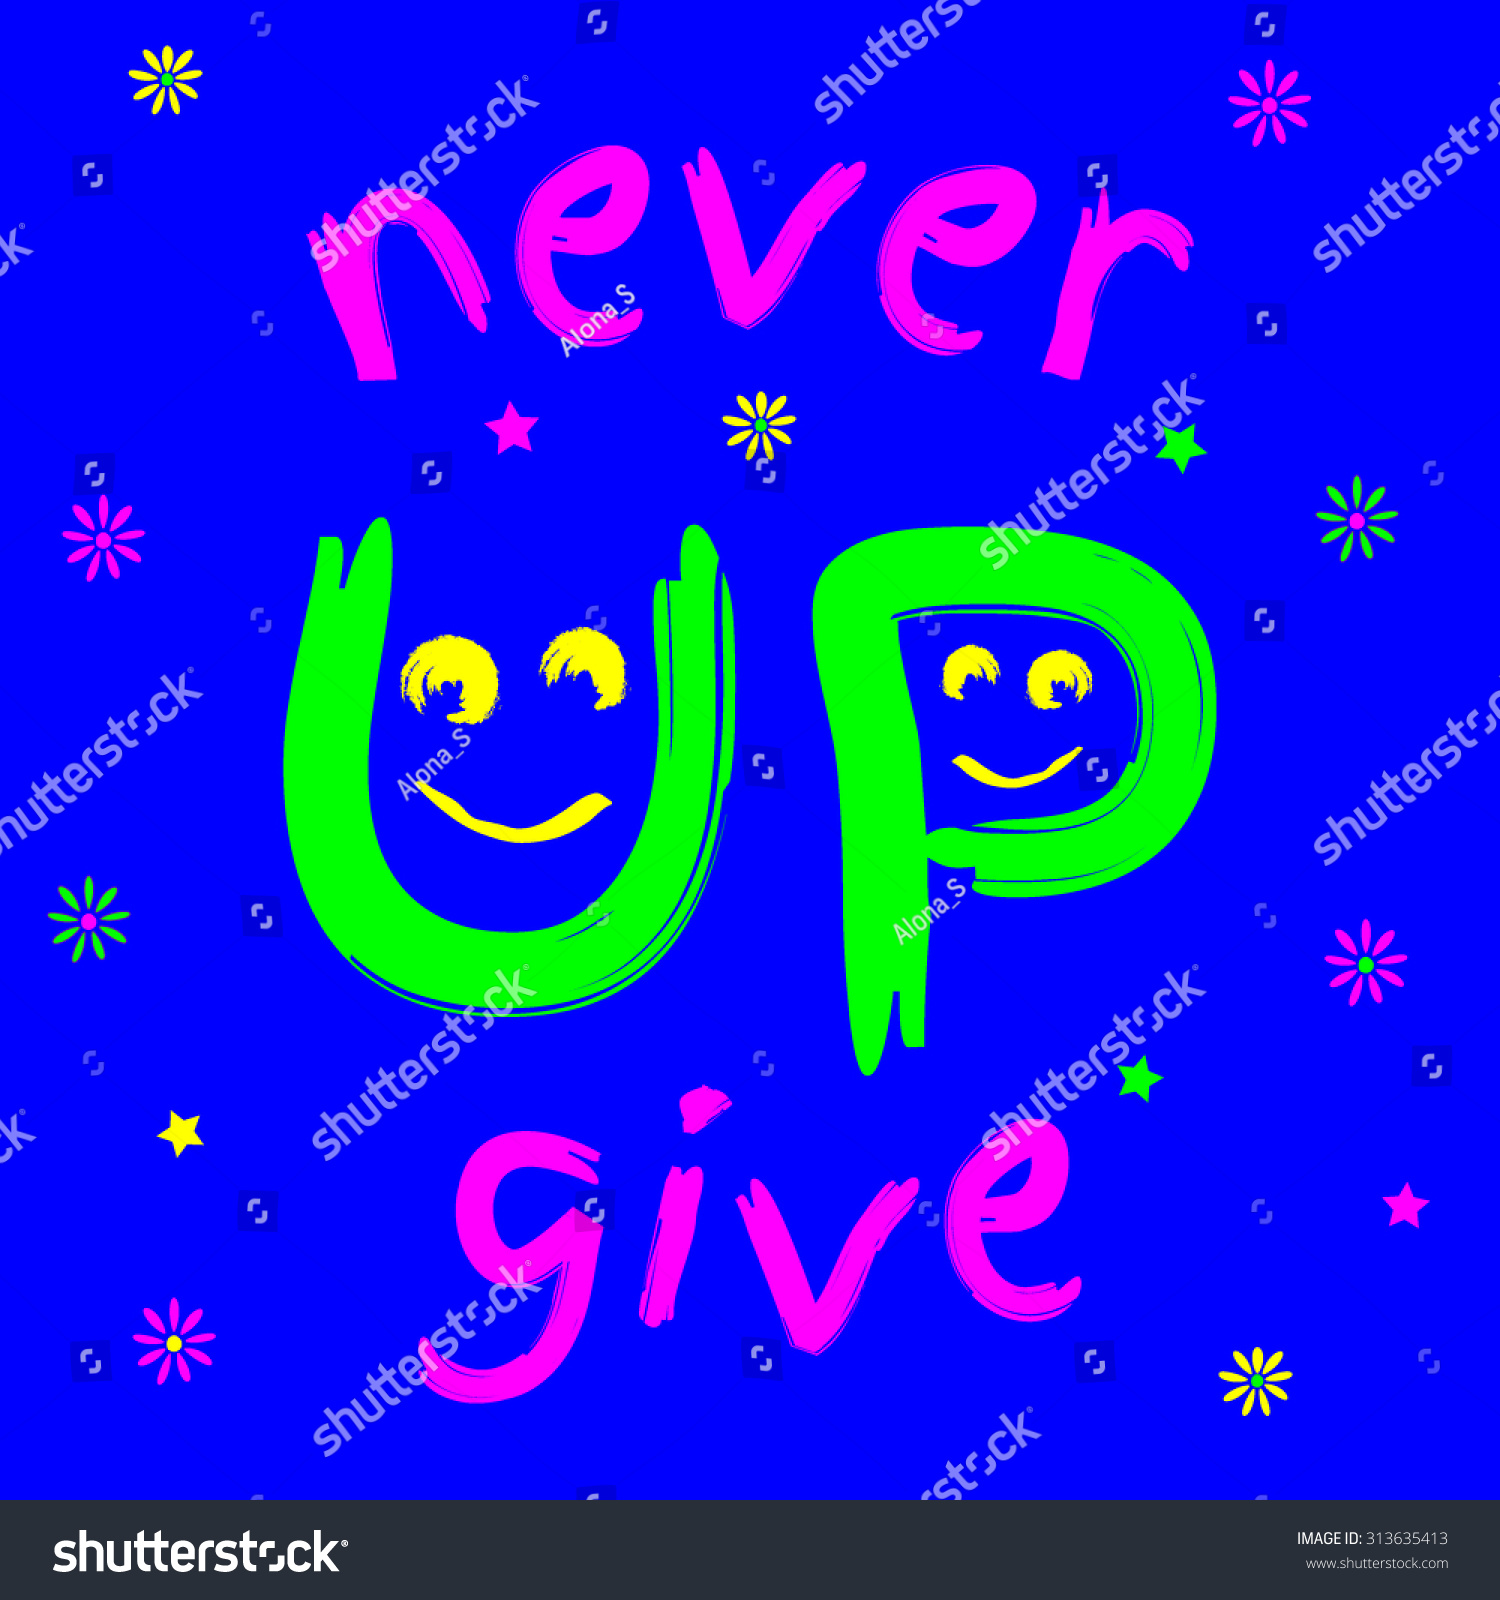 Never Give Typography Graphics Conceptual Handwritten Stock Vector Royalty Free 313635413 5031